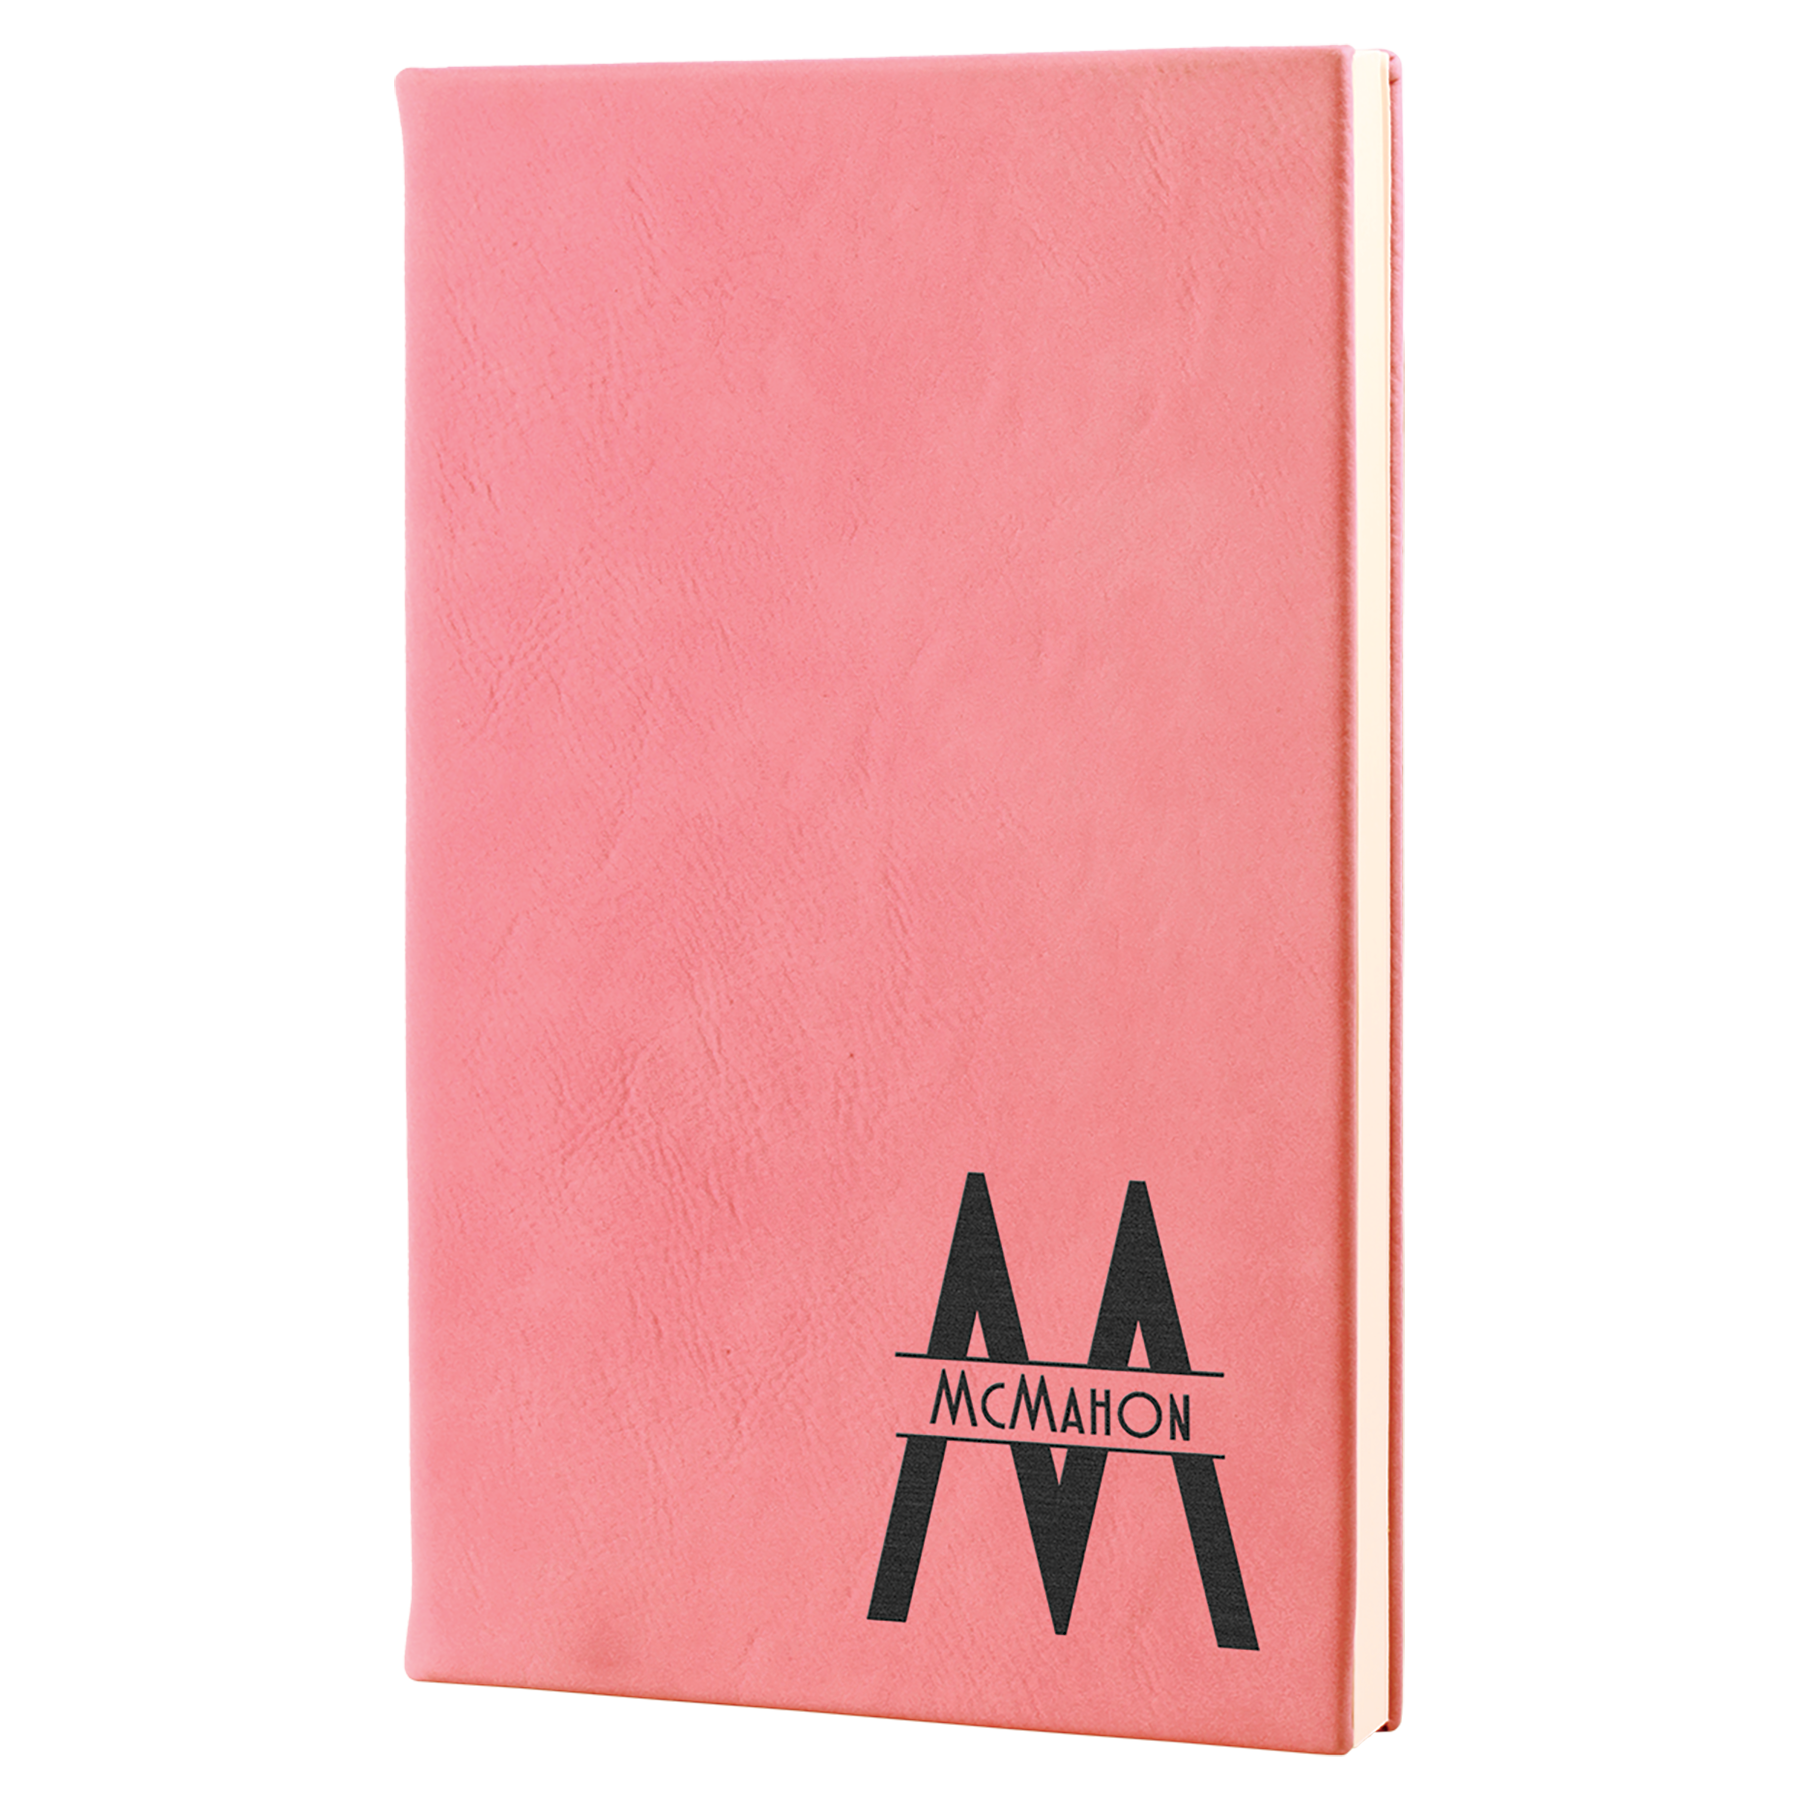 5 1/4" x 8 1/4" Leatherette Journal